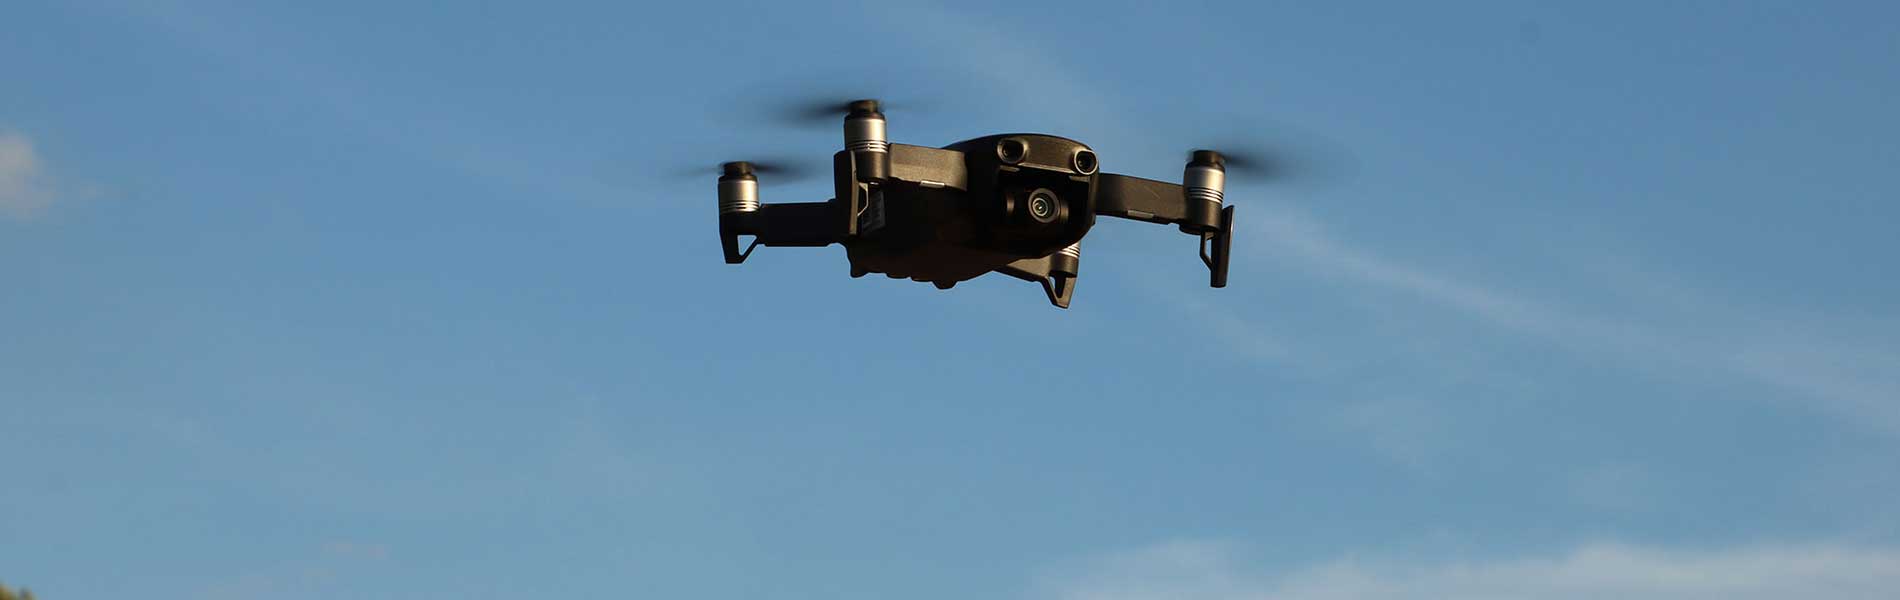 Tarif drone immobilier